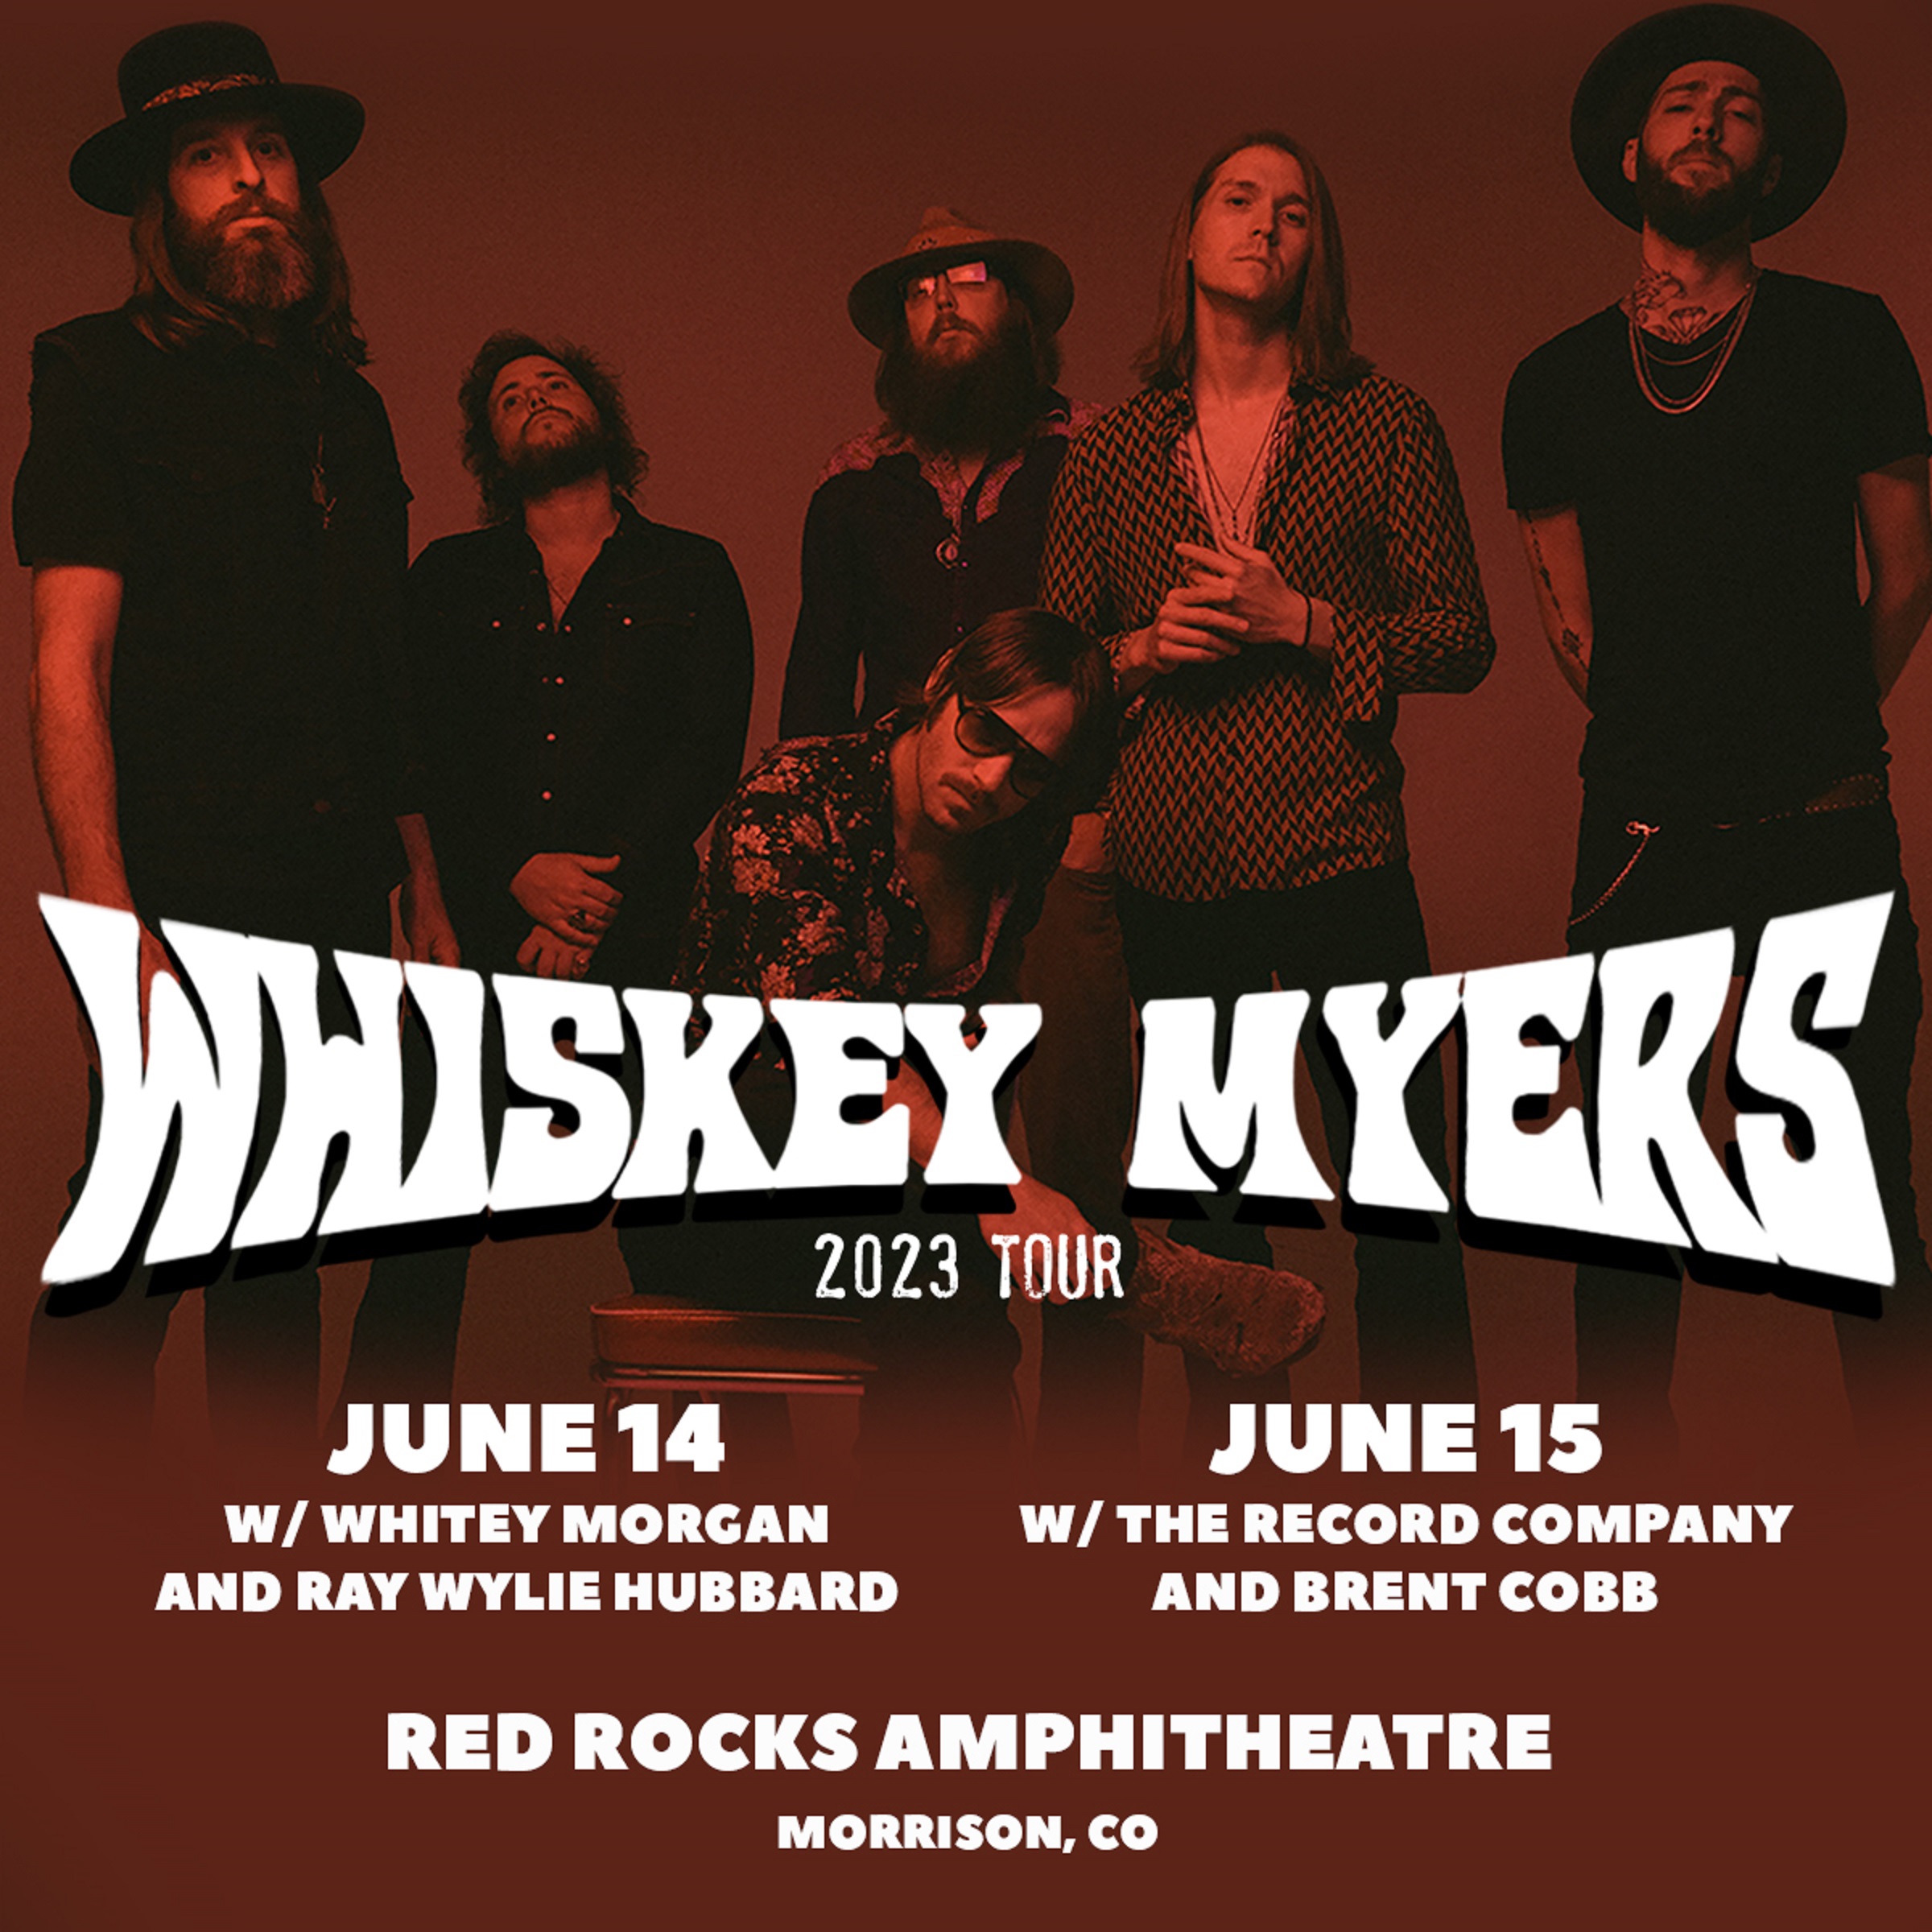 WHISKEY MYERS RETURN TO RED ROCKS FOR TWO NIGHT STAND